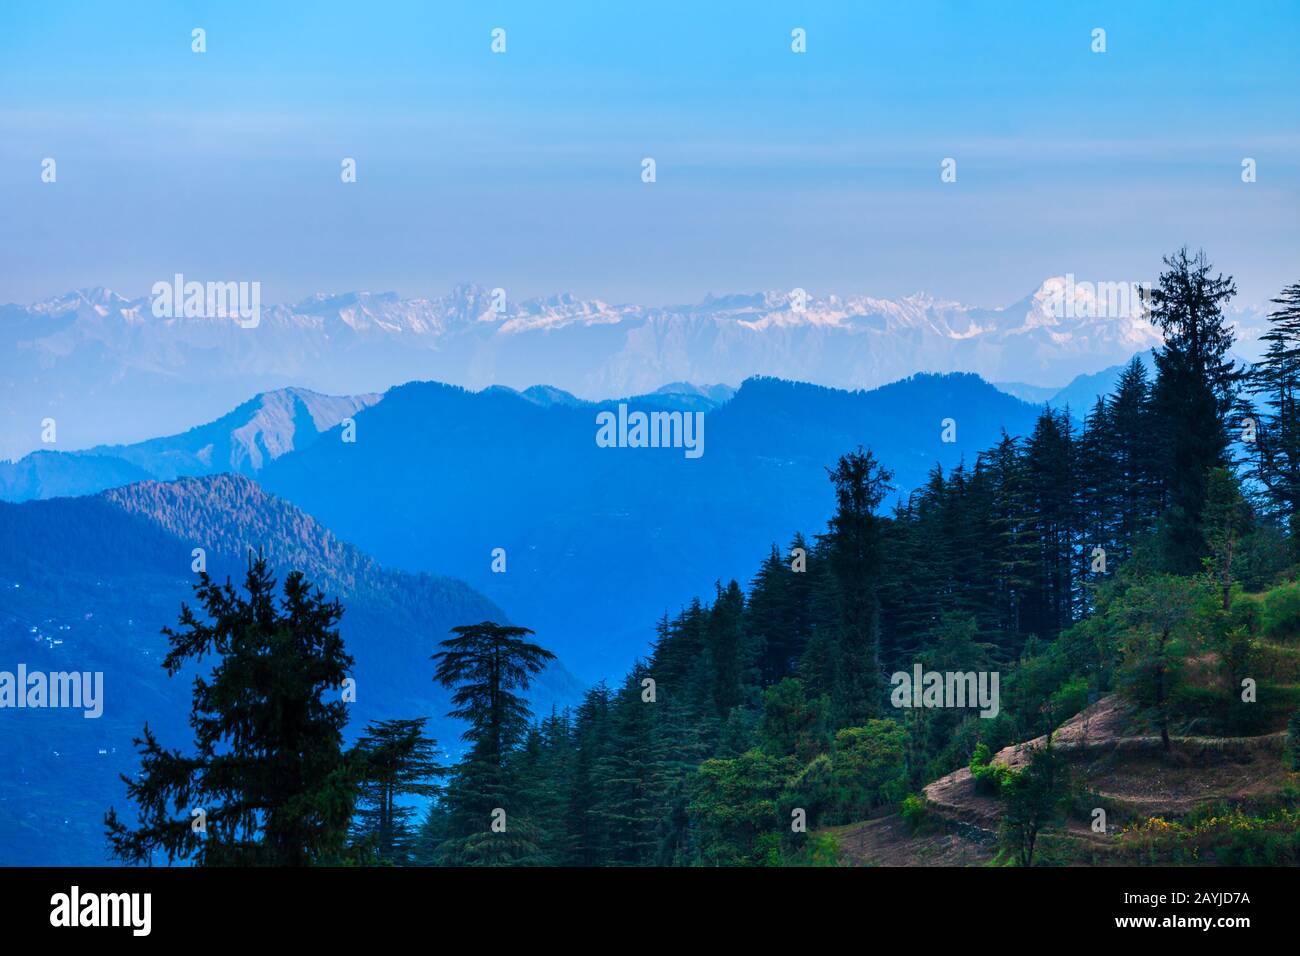 Great Himalayas or Greater Himalayas at sunrise, it is the highest mountain range, Himachal Pradesh state in India. View from Jalori Pass viewpoint. Stock Photo